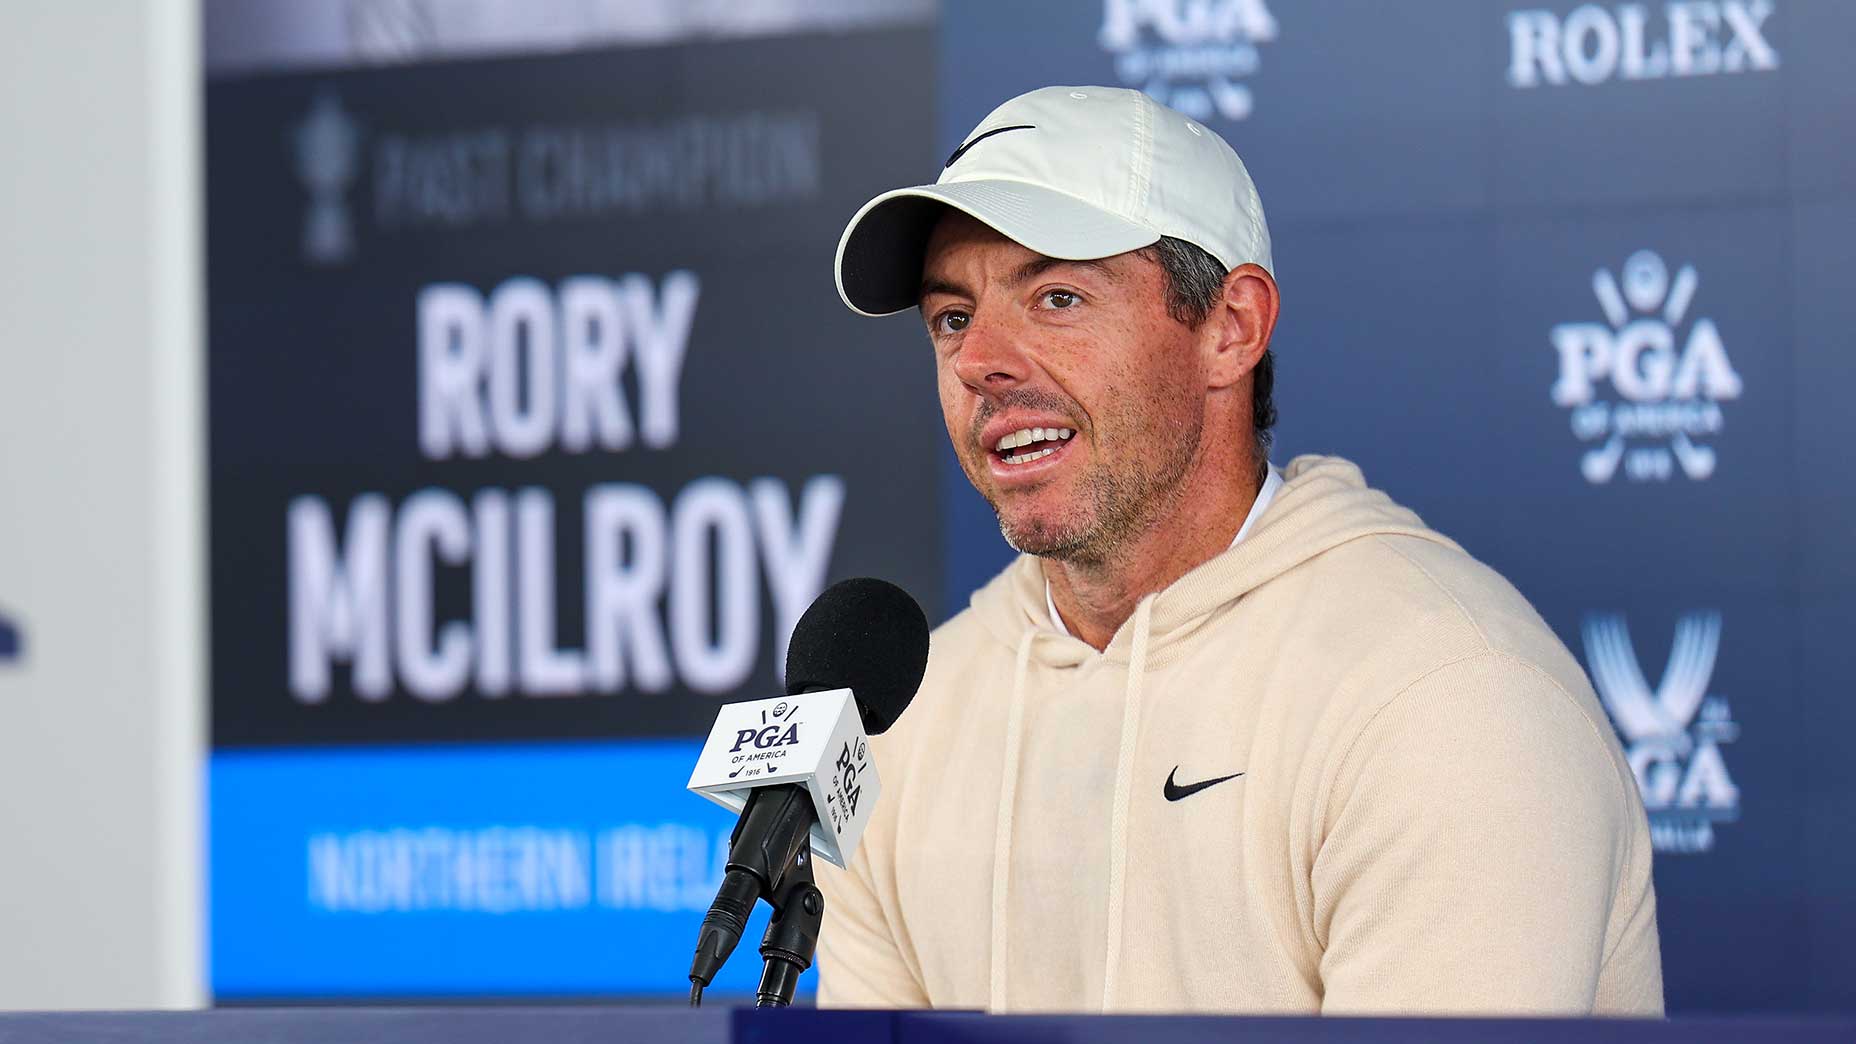 Rory McIlroy speaks to the media on Wednesday at the PGA Championship in Louisville, Ky.